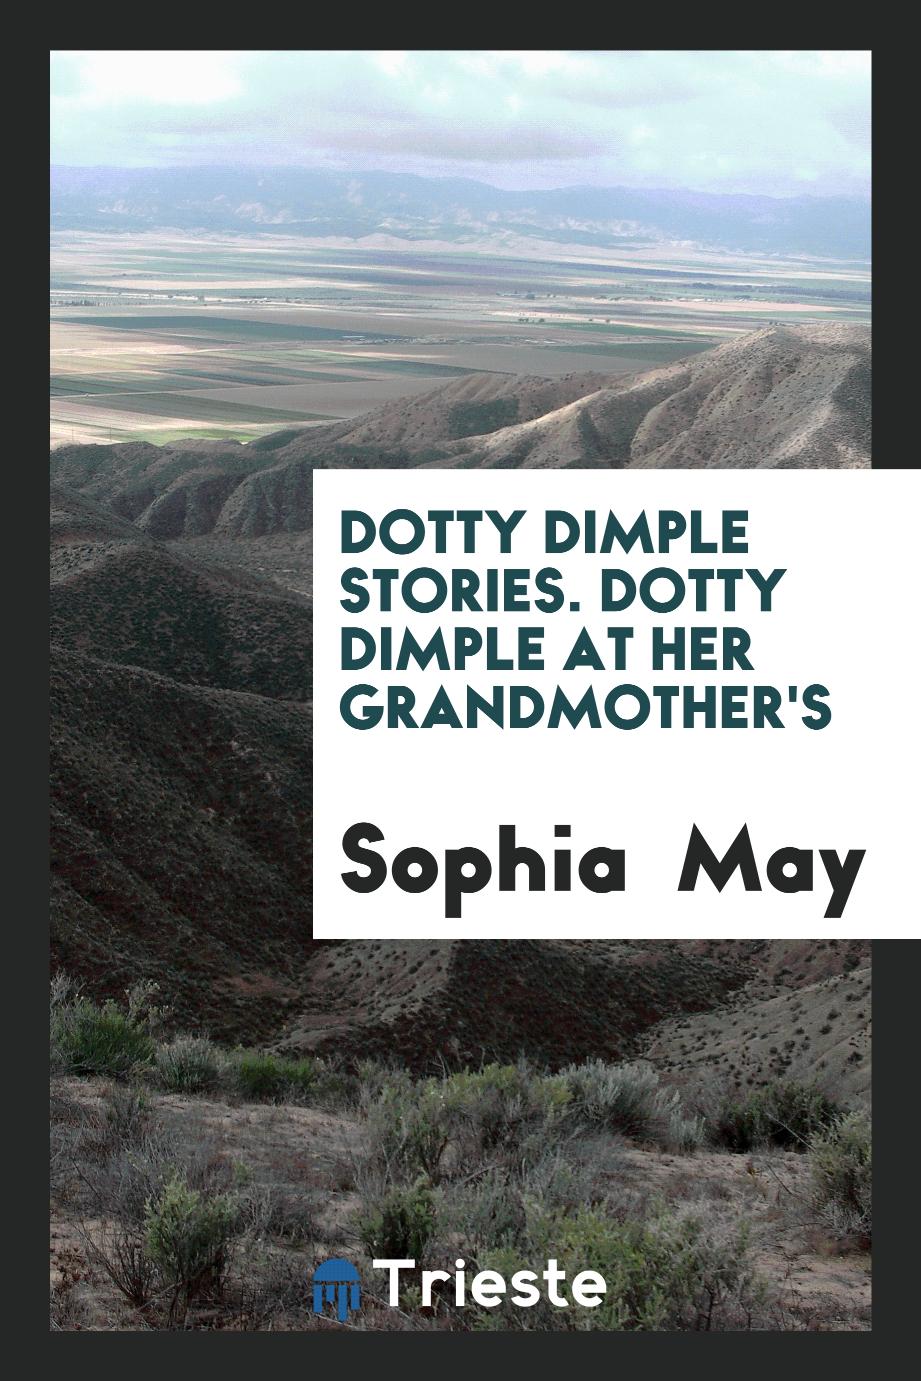 Dotty Dimple Stories. Dotty Dimple at Her Grandmother's